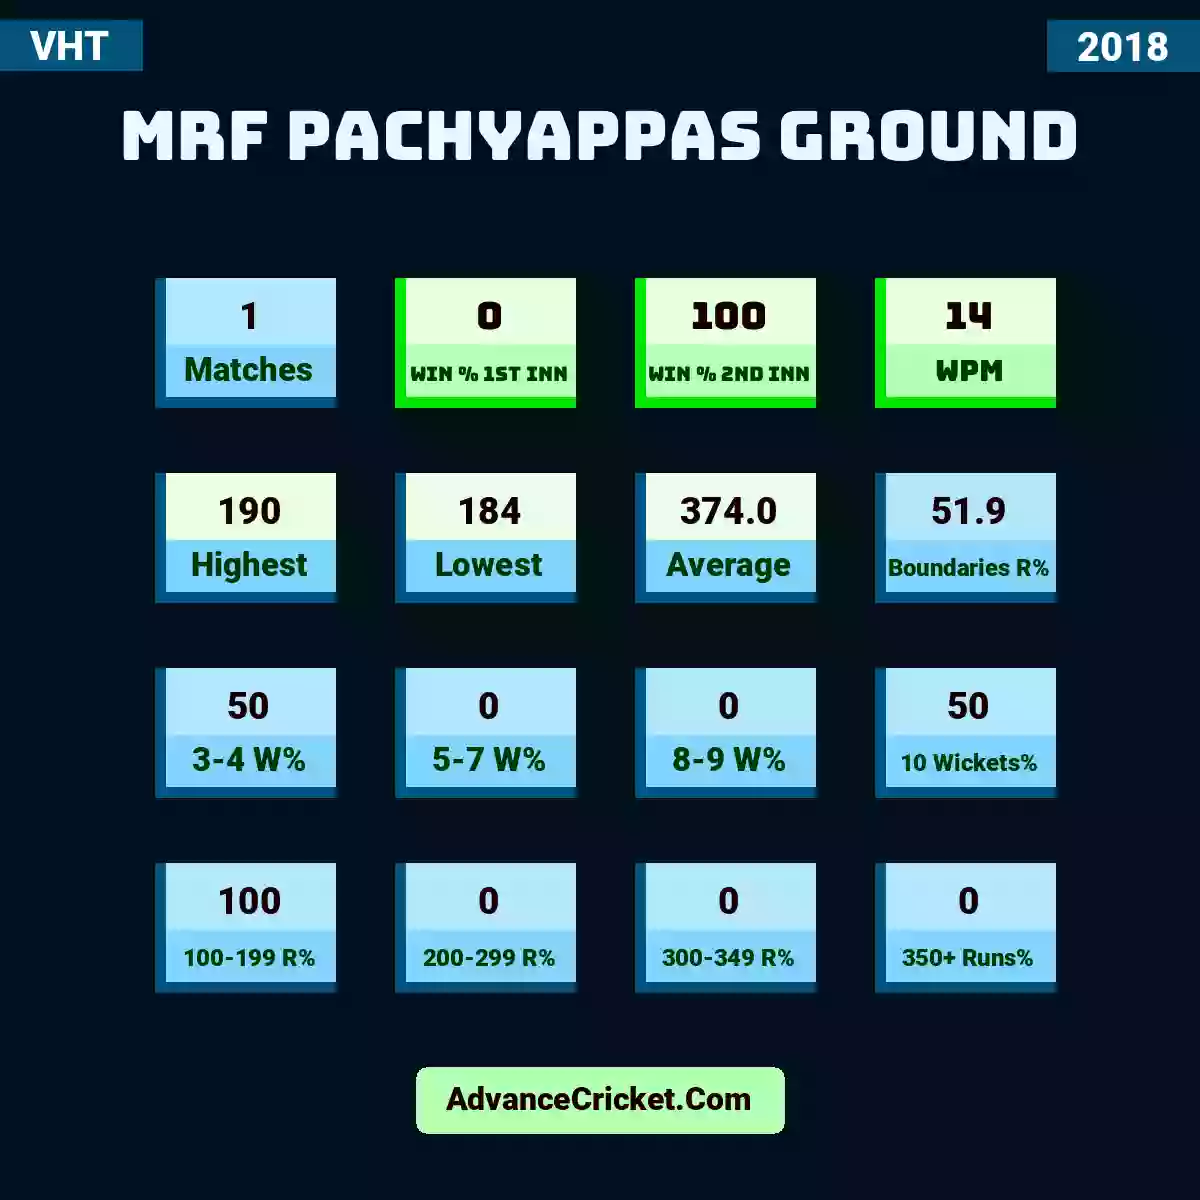 Image showing MRF Pachyappas Ground with Matches: 1, Win % 1st Inn: 0, Win % 2nd Inn: 100, WPM: 14, Highest: 190, Lowest: 184, Average: 374.0, Boundaries R%: 51.9, 3-4 W%: 50, 5-7 W%: 0, 8-9 W%: 0, 10 Wickets%: 50, 100-199 R%: 100, 200-299 R%: 0, 300-349 R%: 0, 350+ Runs%: 0.